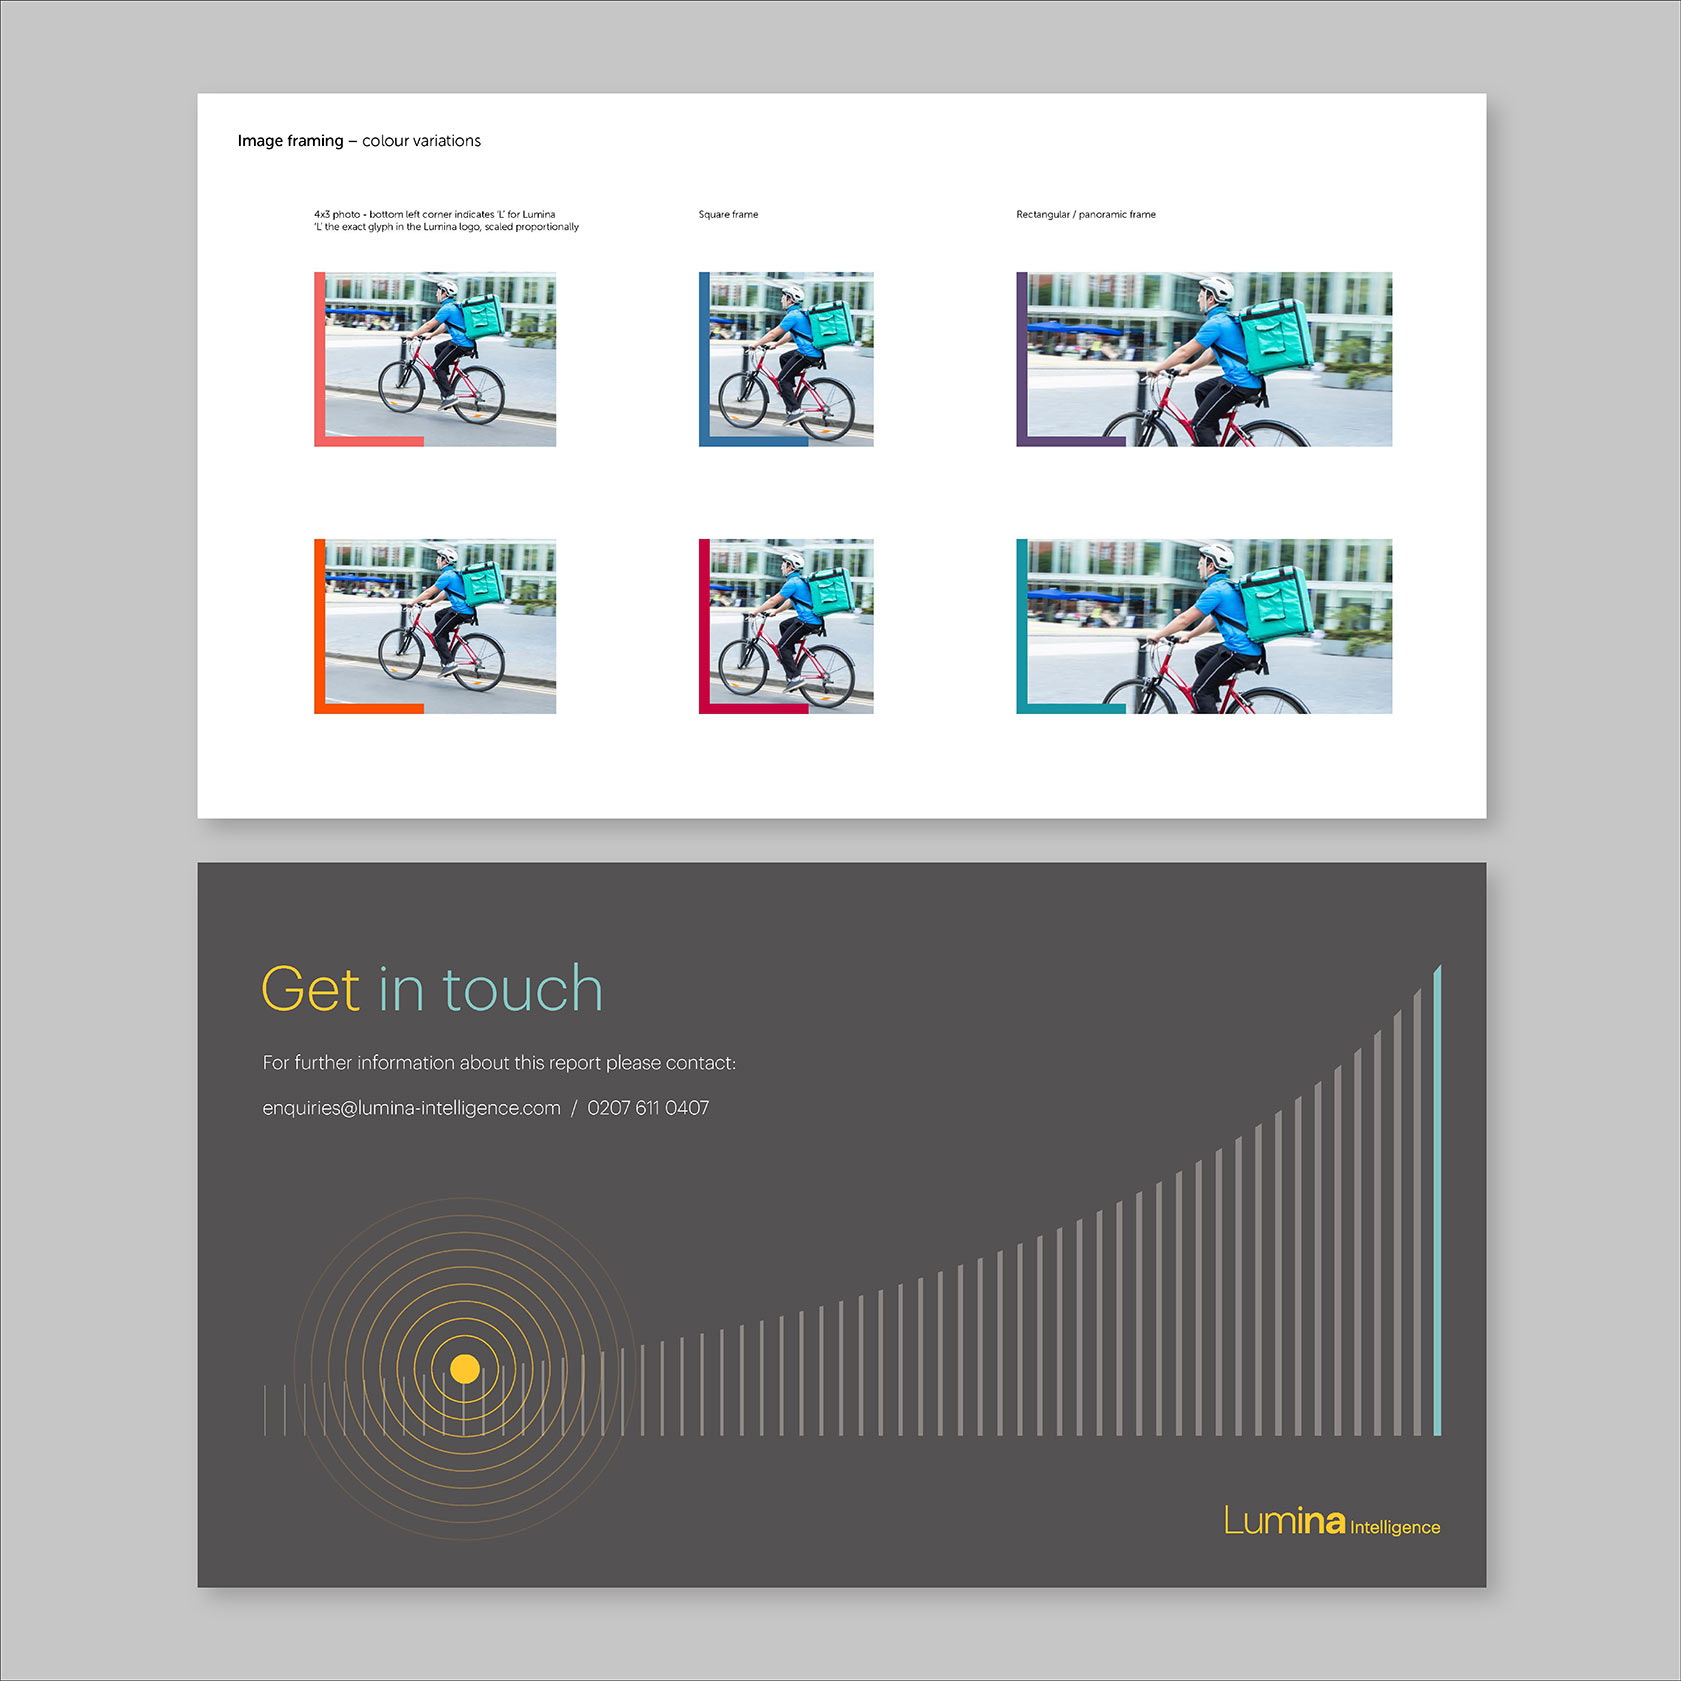 Sample brand guidelines on image framing, plus a report end slide template.